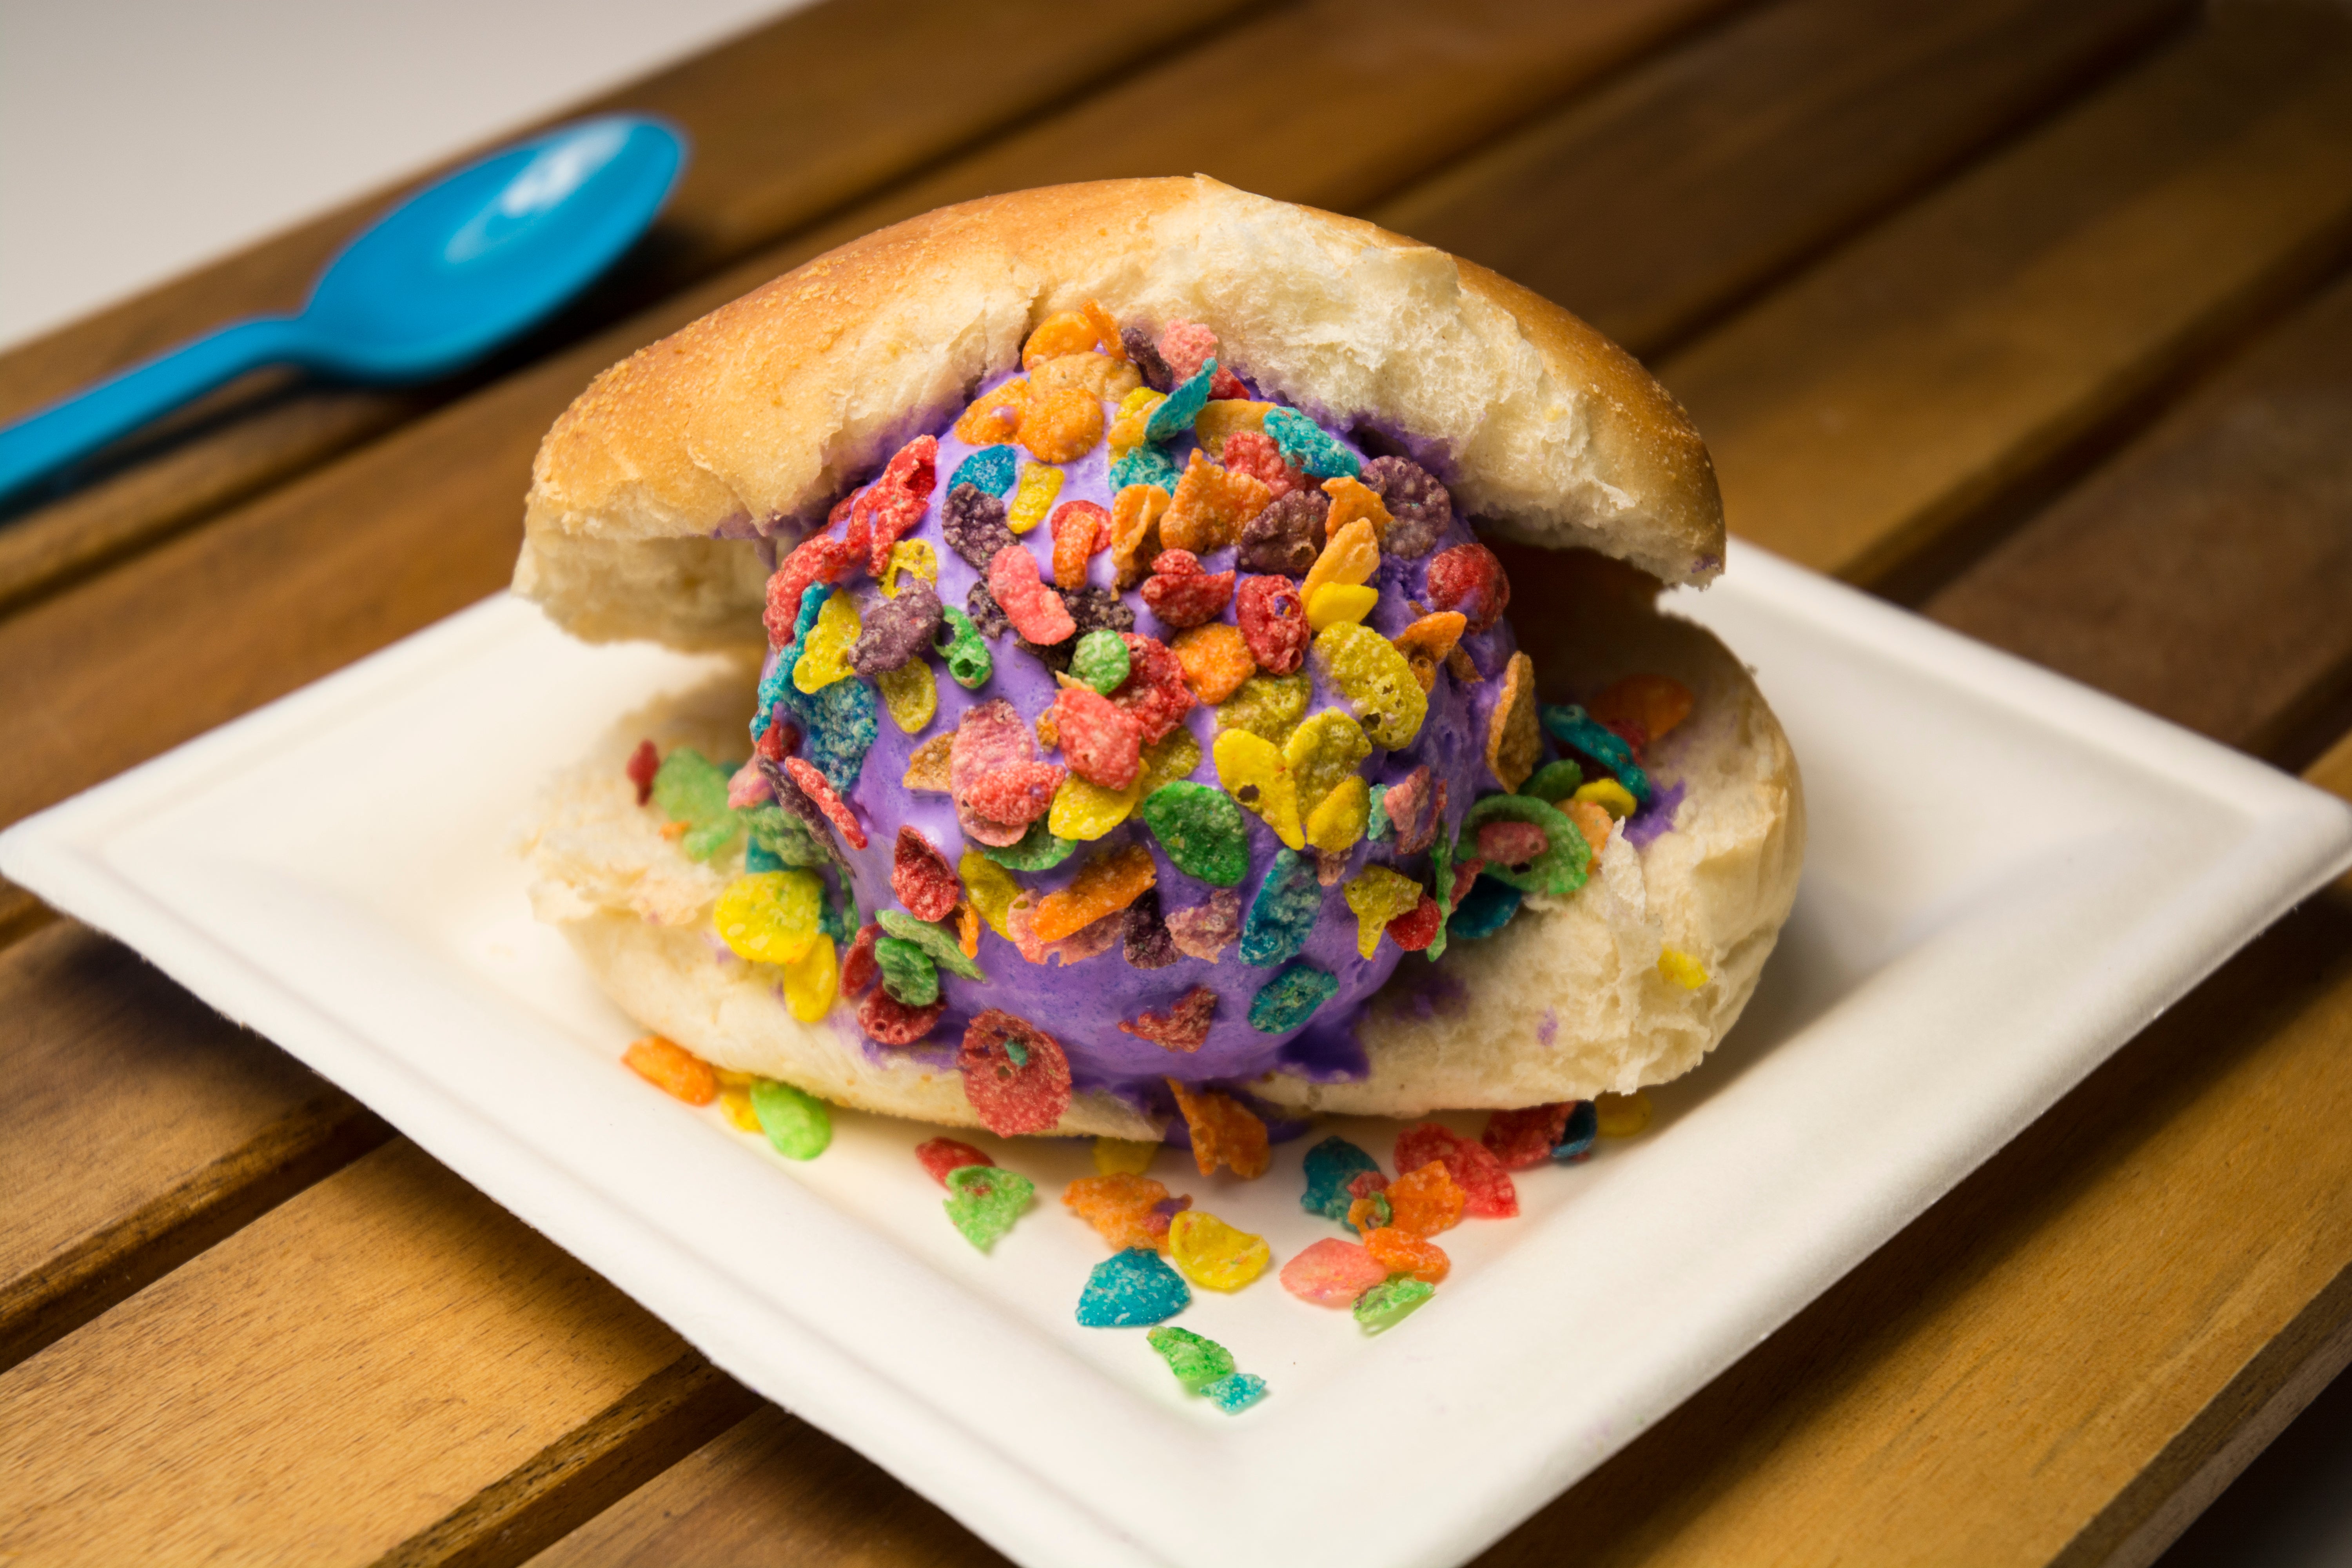 Recipe for ‘ice cream burger’ sparks mixed reactions